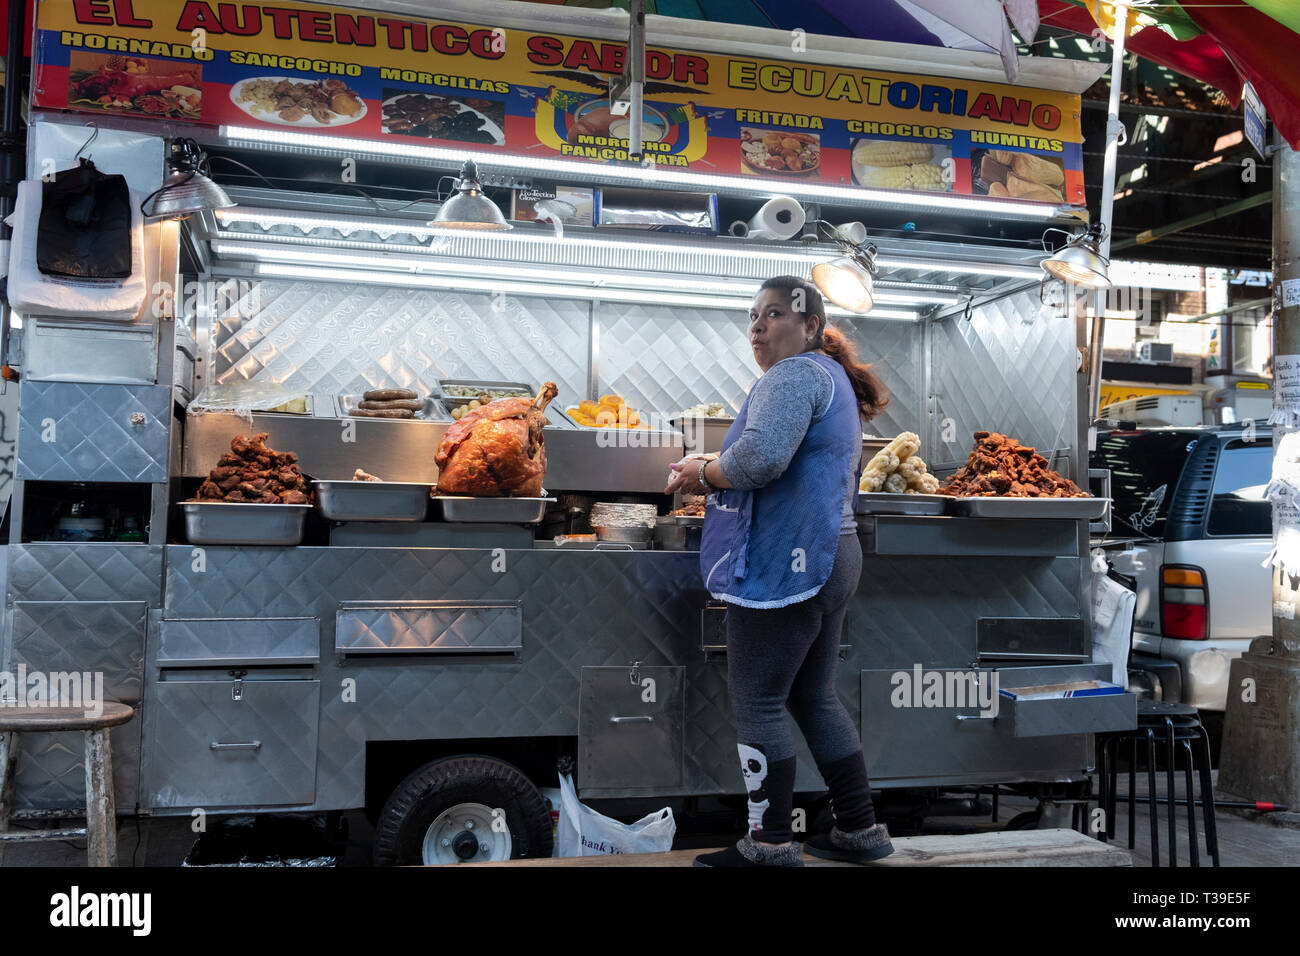 An Ecuadorian American woman selling grilled meats & other foods from a cart underneath the elevated subway trains . In Corona, Queens, NYC Stock Photo